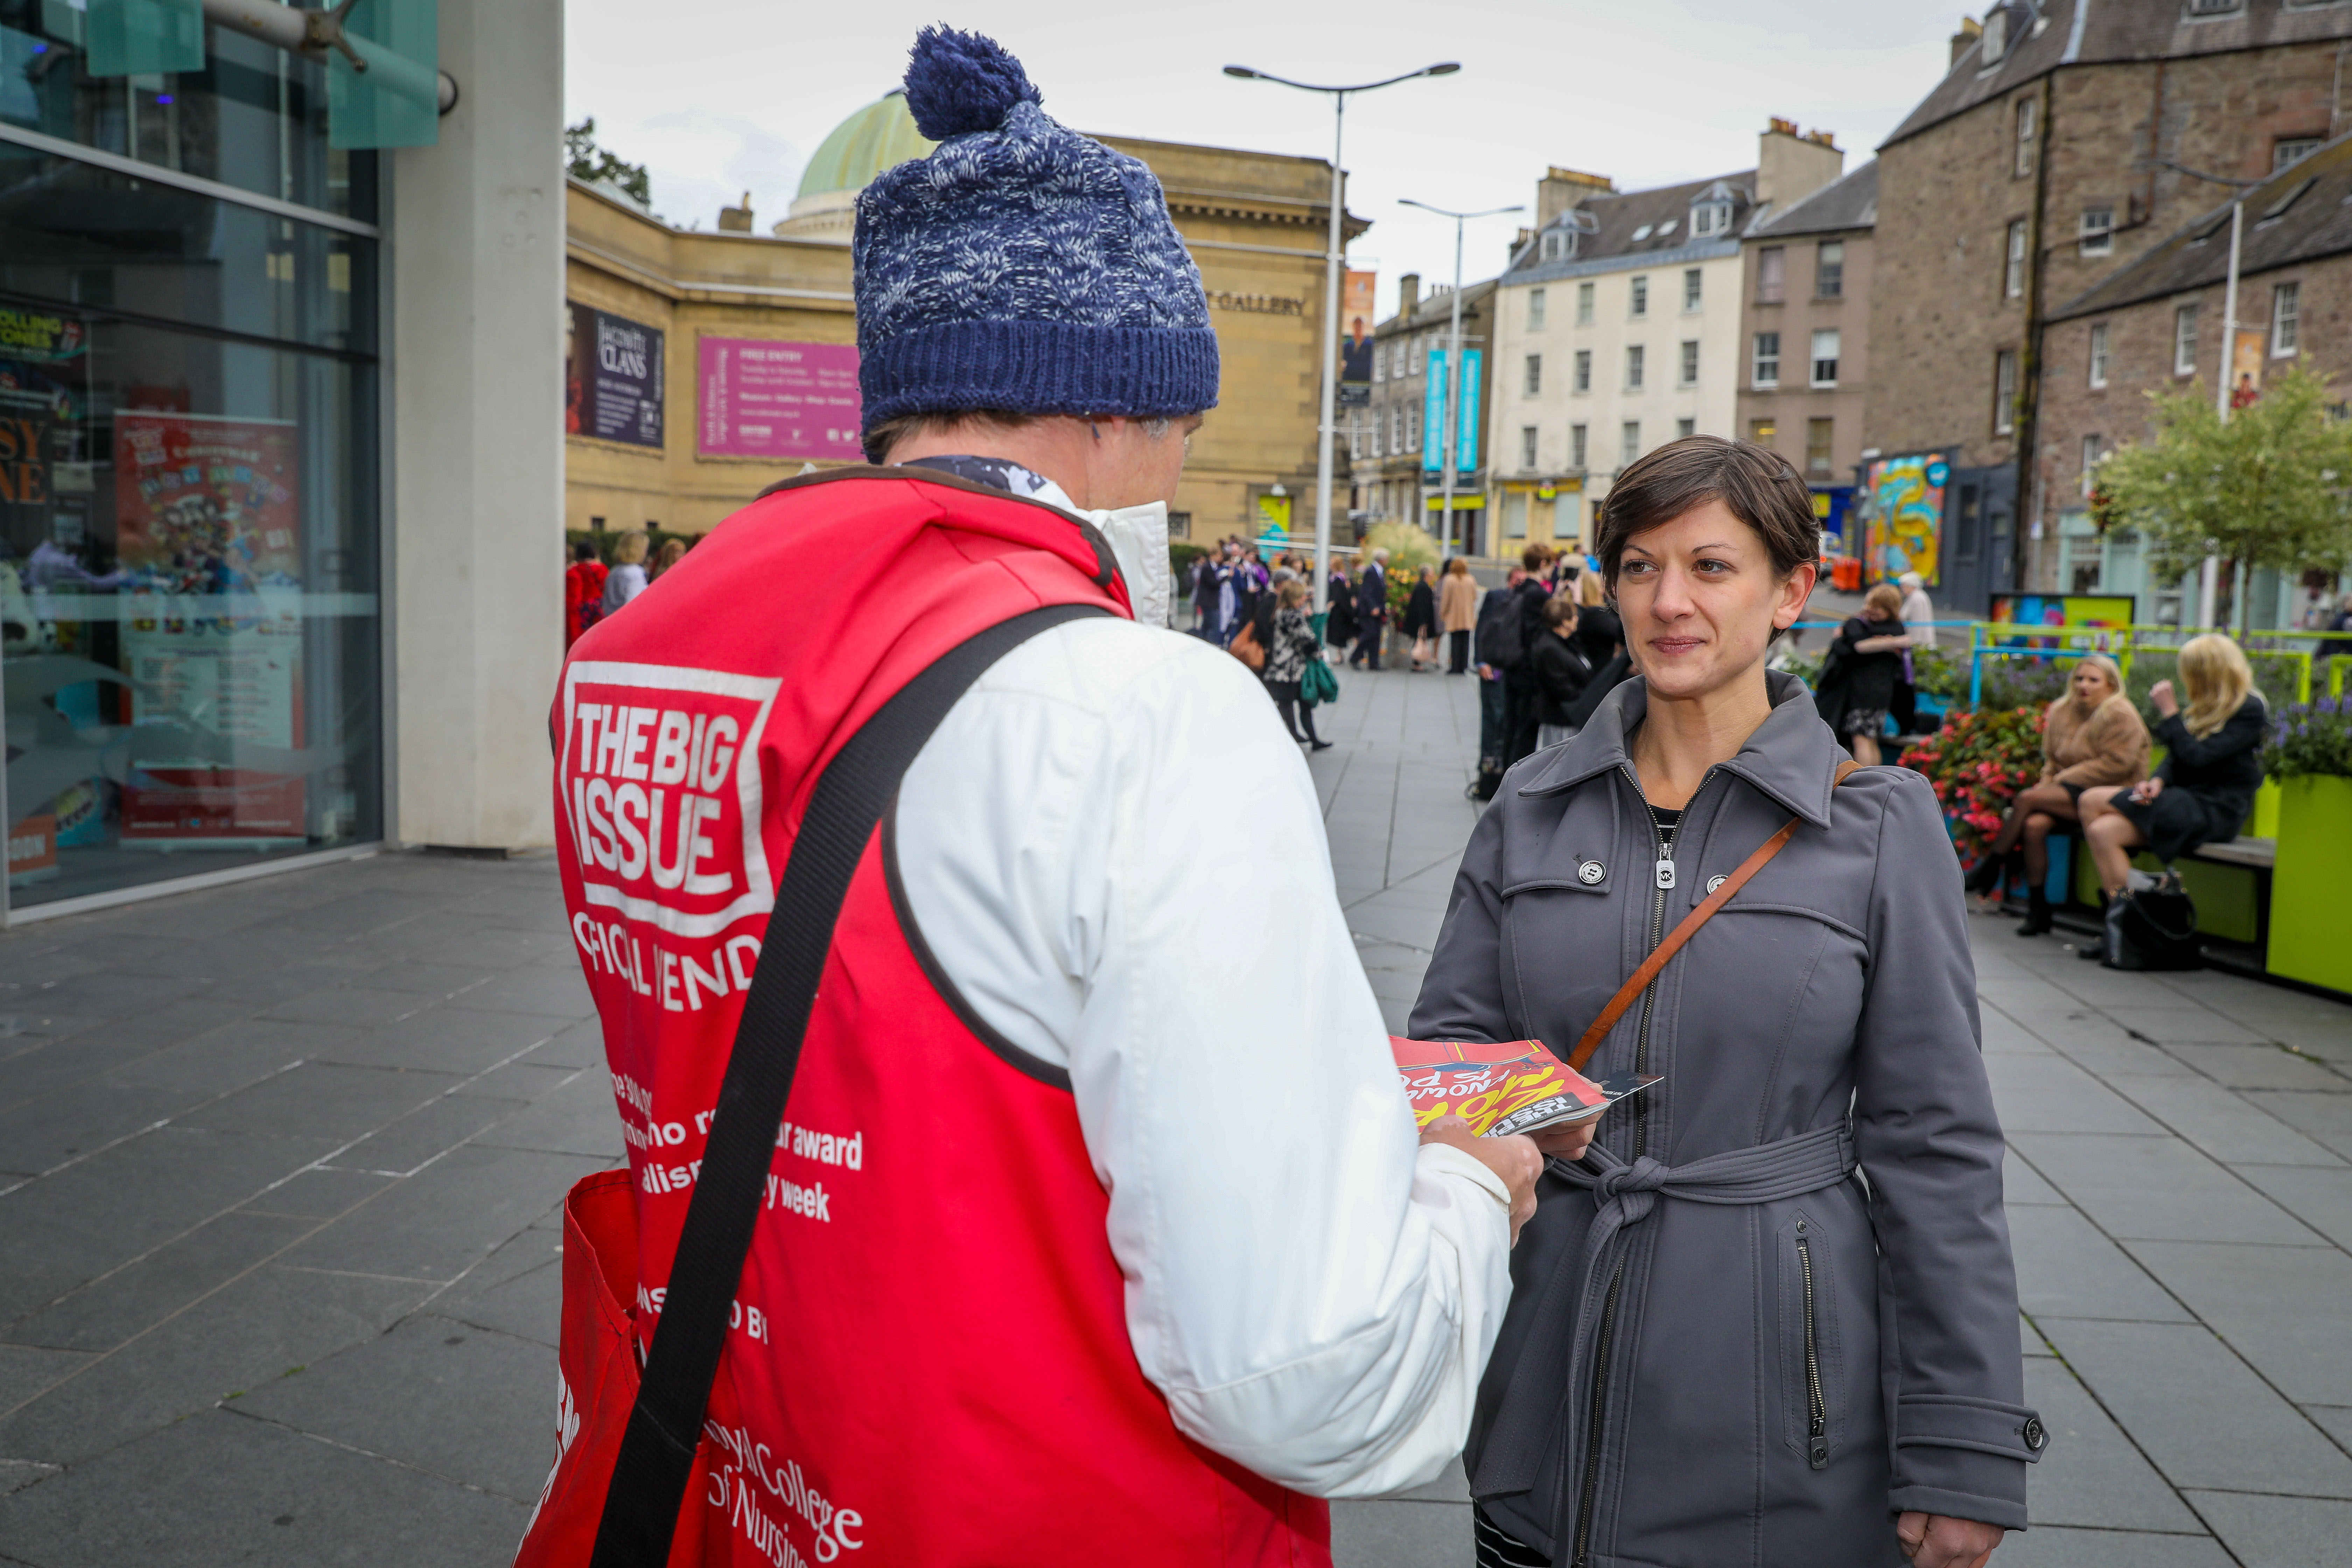 Claire Ferrier looks to purchase a Big Issue from vendor Brian